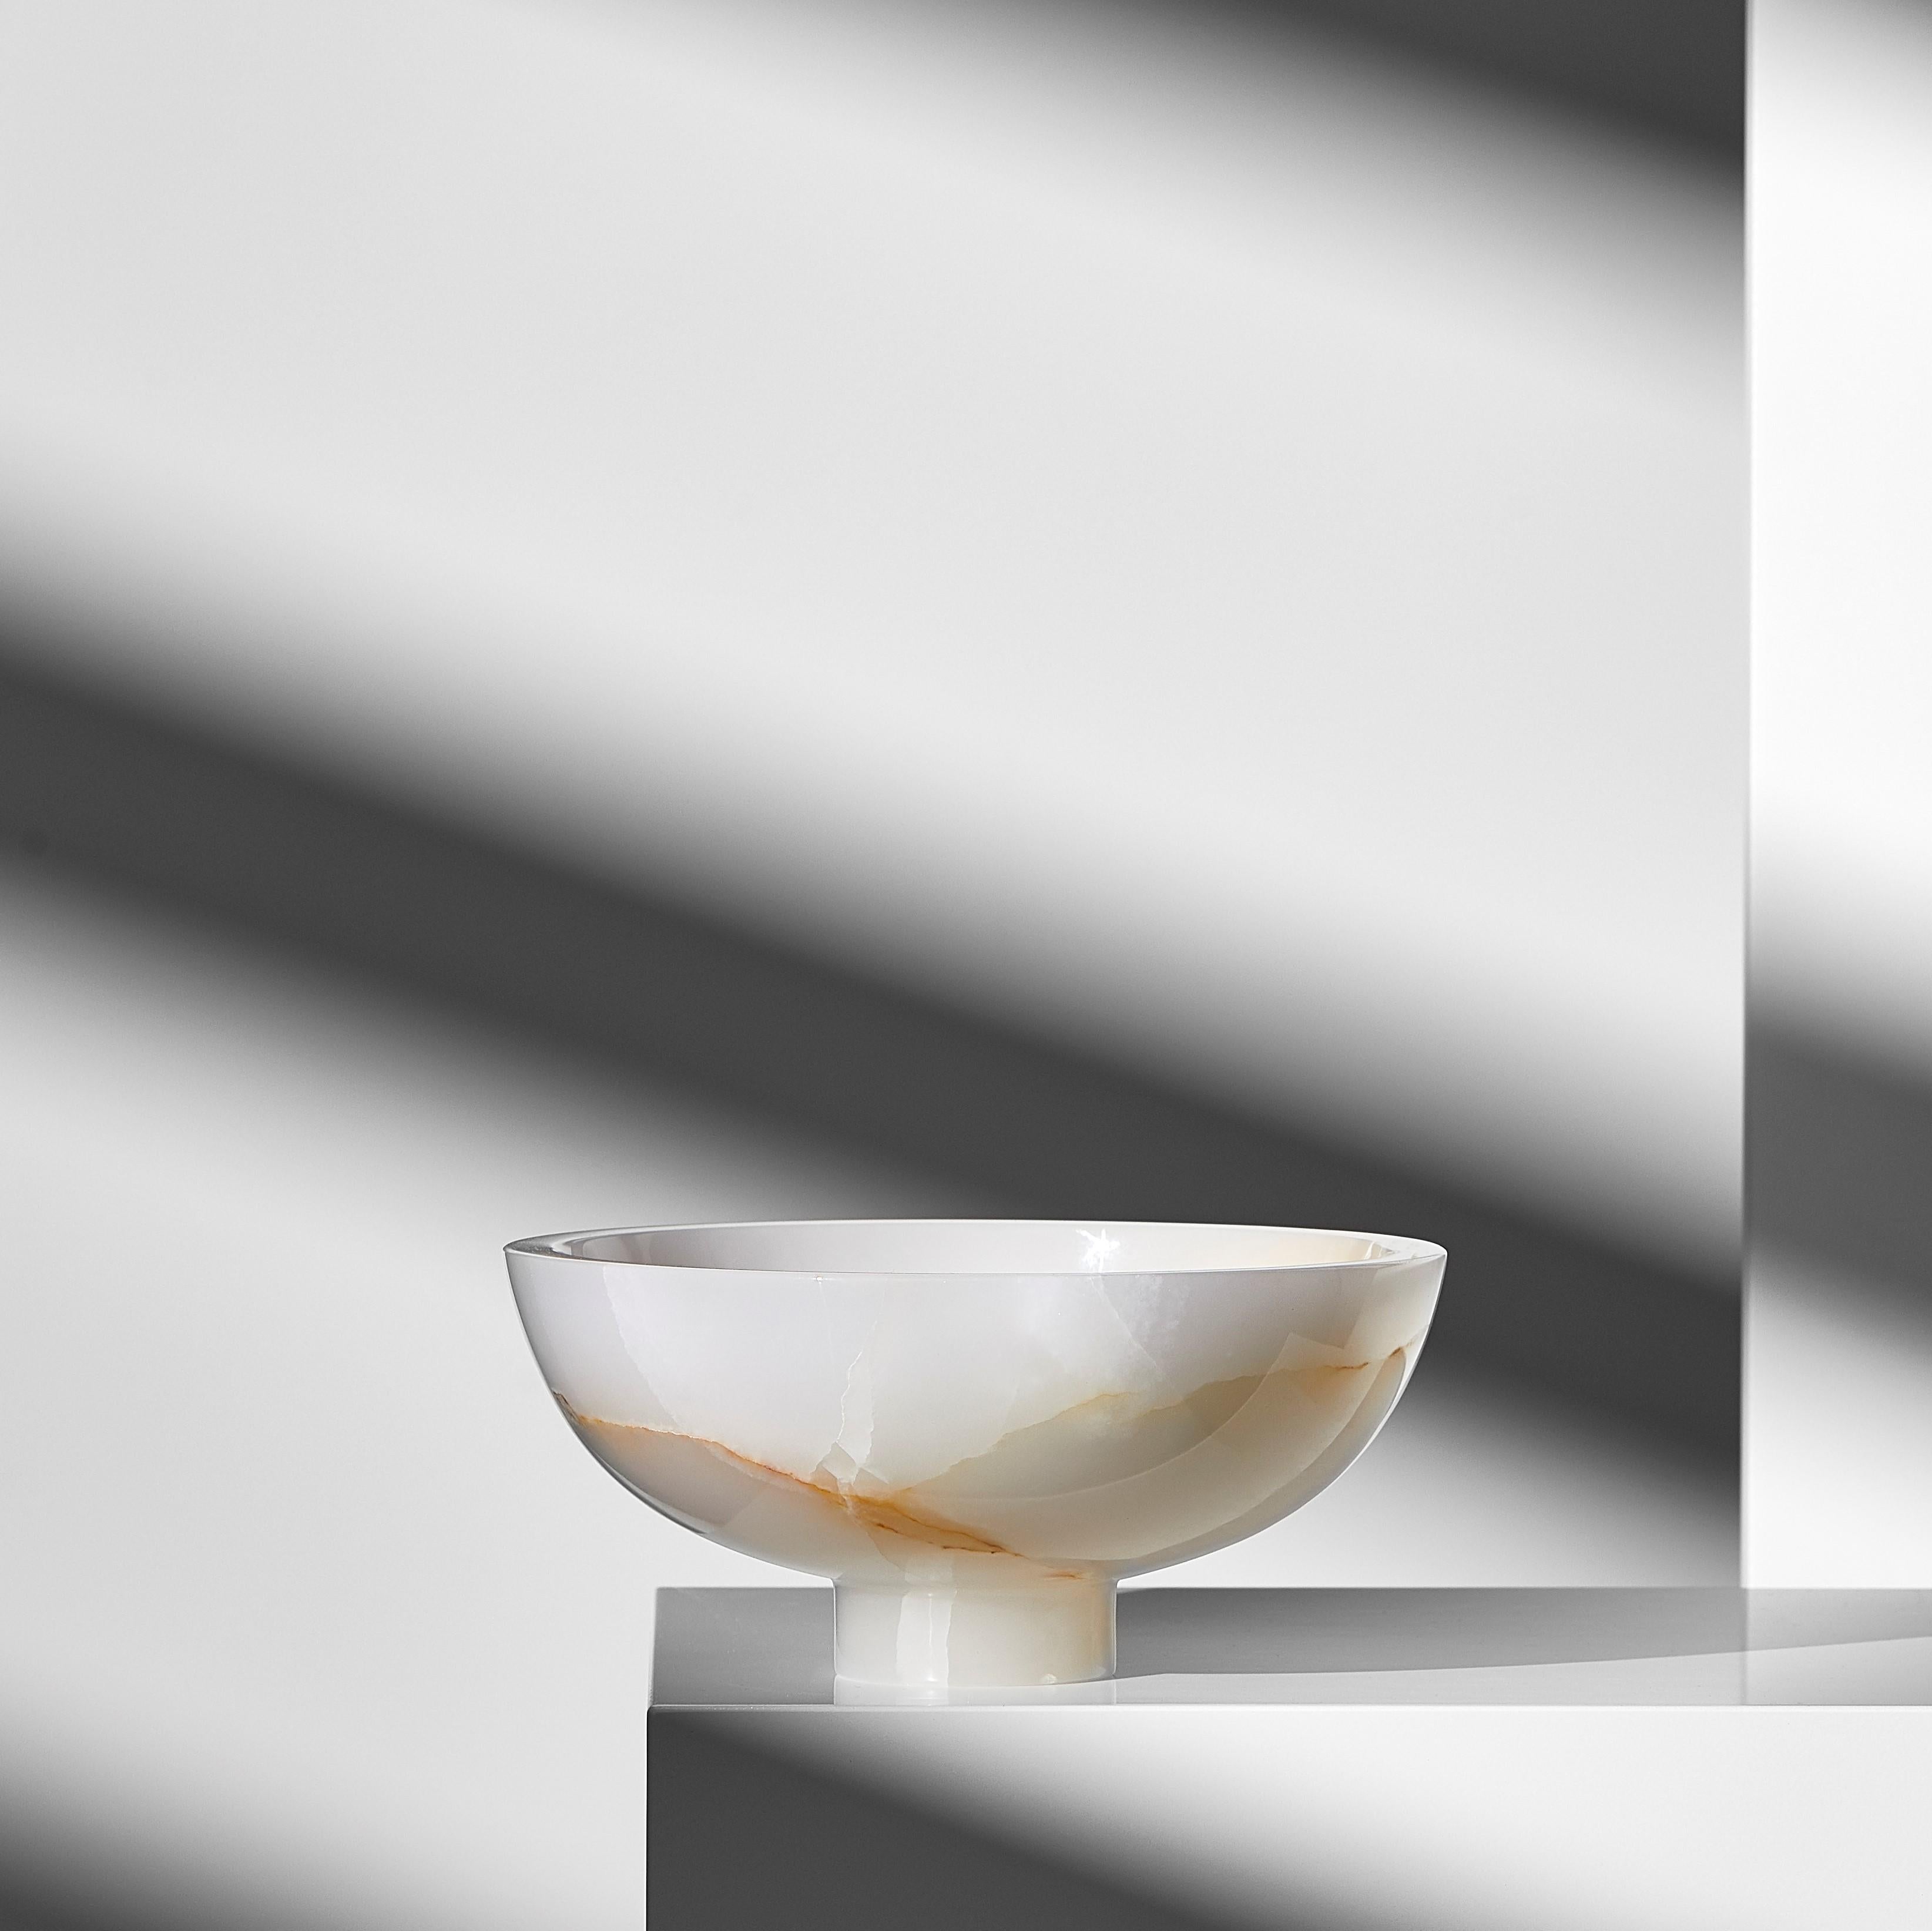 Twosidestory Bowl by Lisette Rützou
Dimensions: D 20 cm
Materials: Onyx

 Lisette Rützou’s design is motivated by an urge to articulate a story. Inspired by the beauty of materials, form and architecture, each design is an independent statement -